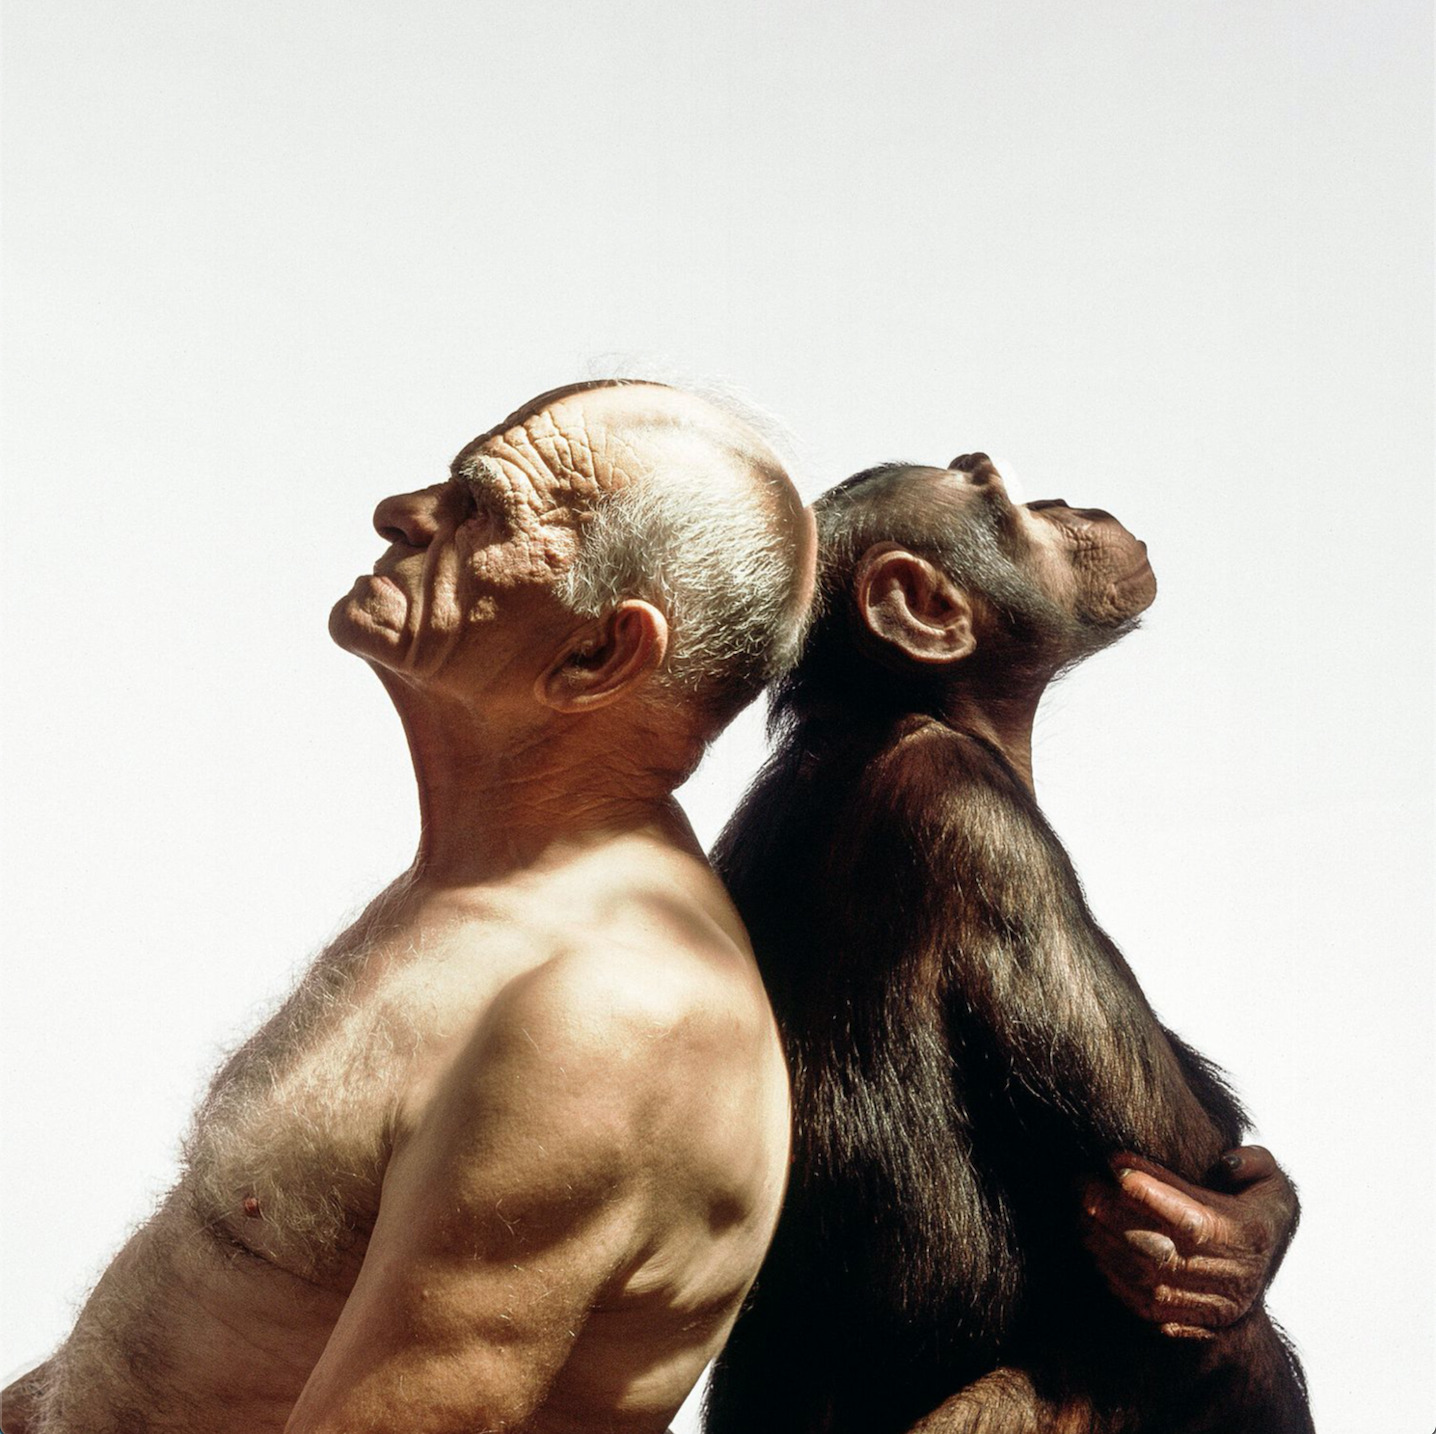 VT2 : ©James Balog; The Old Man and The Ape, 1993